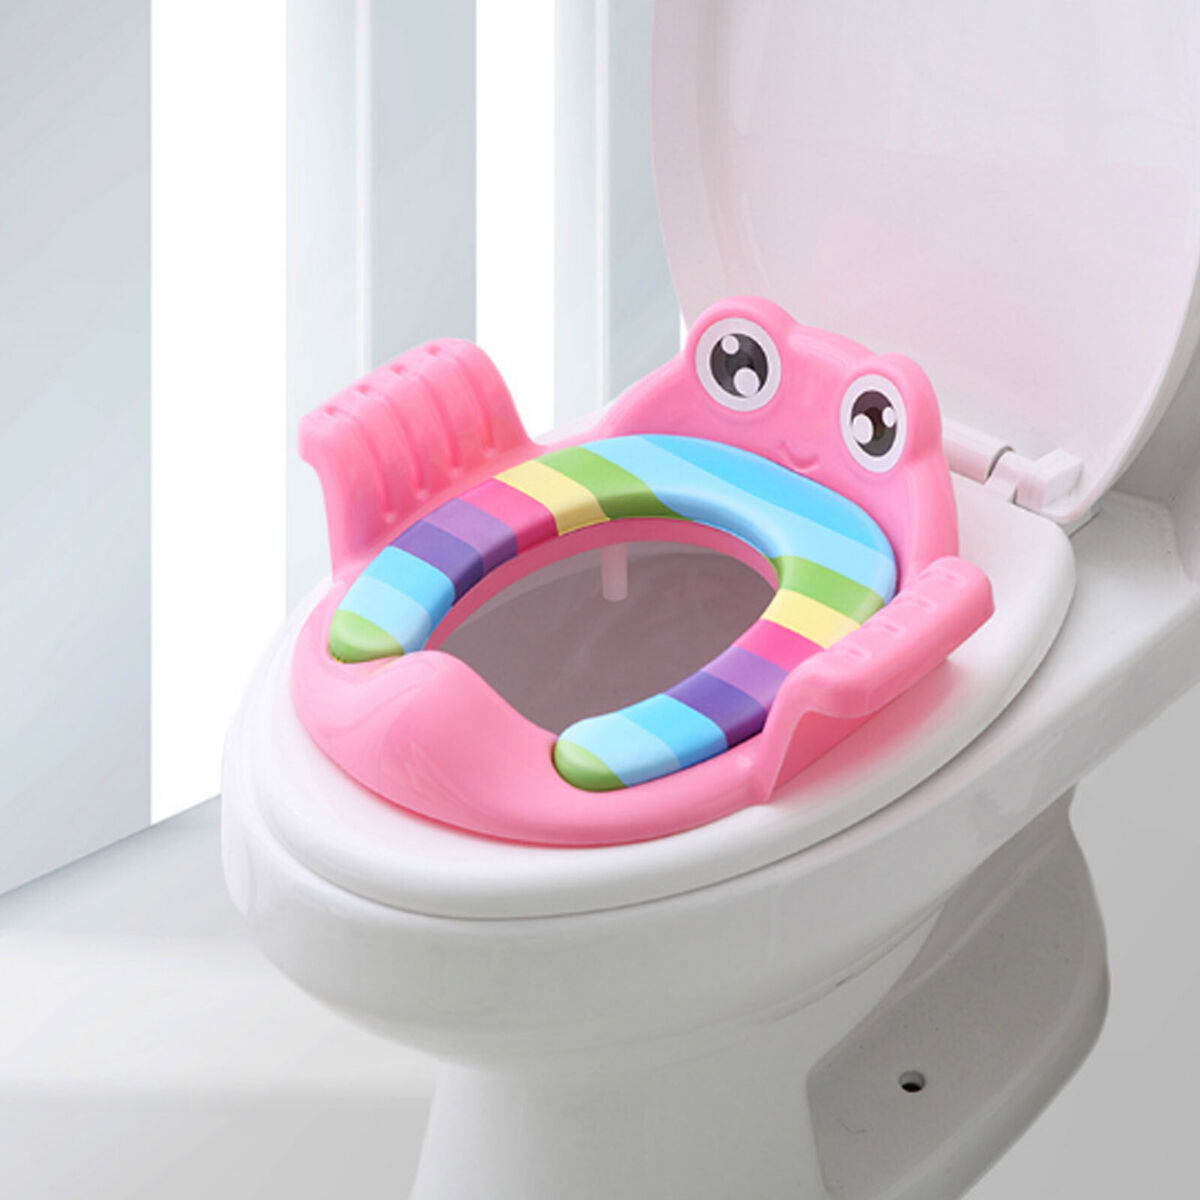 baby toilet seats asda Baby soft padded toilet seat with handles toddler kids safe